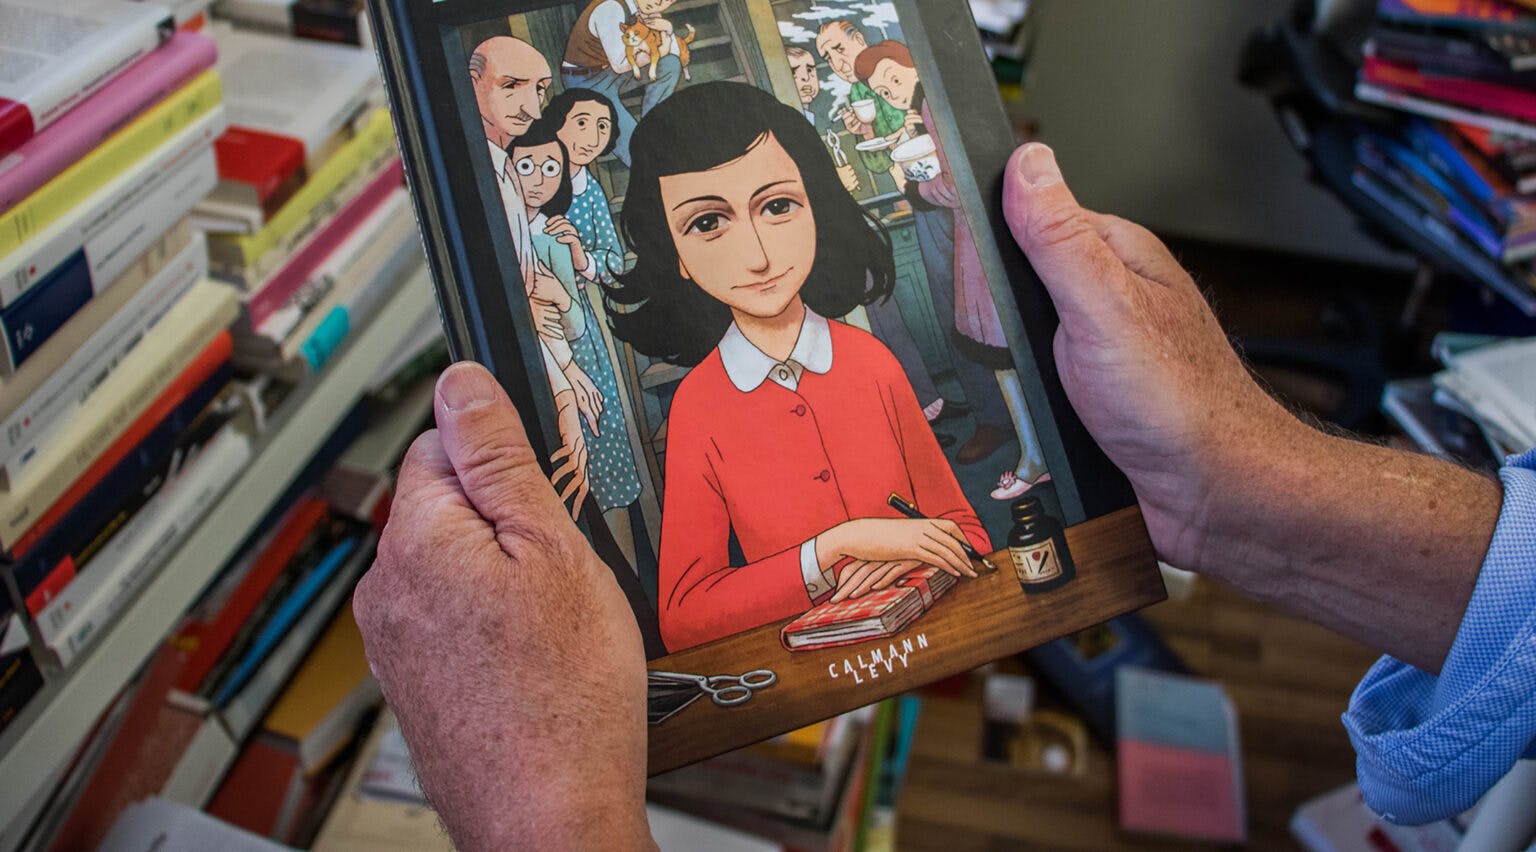 Ep. 807 - Texas fires teacher for sharing ”The Diary of Anne Frank”